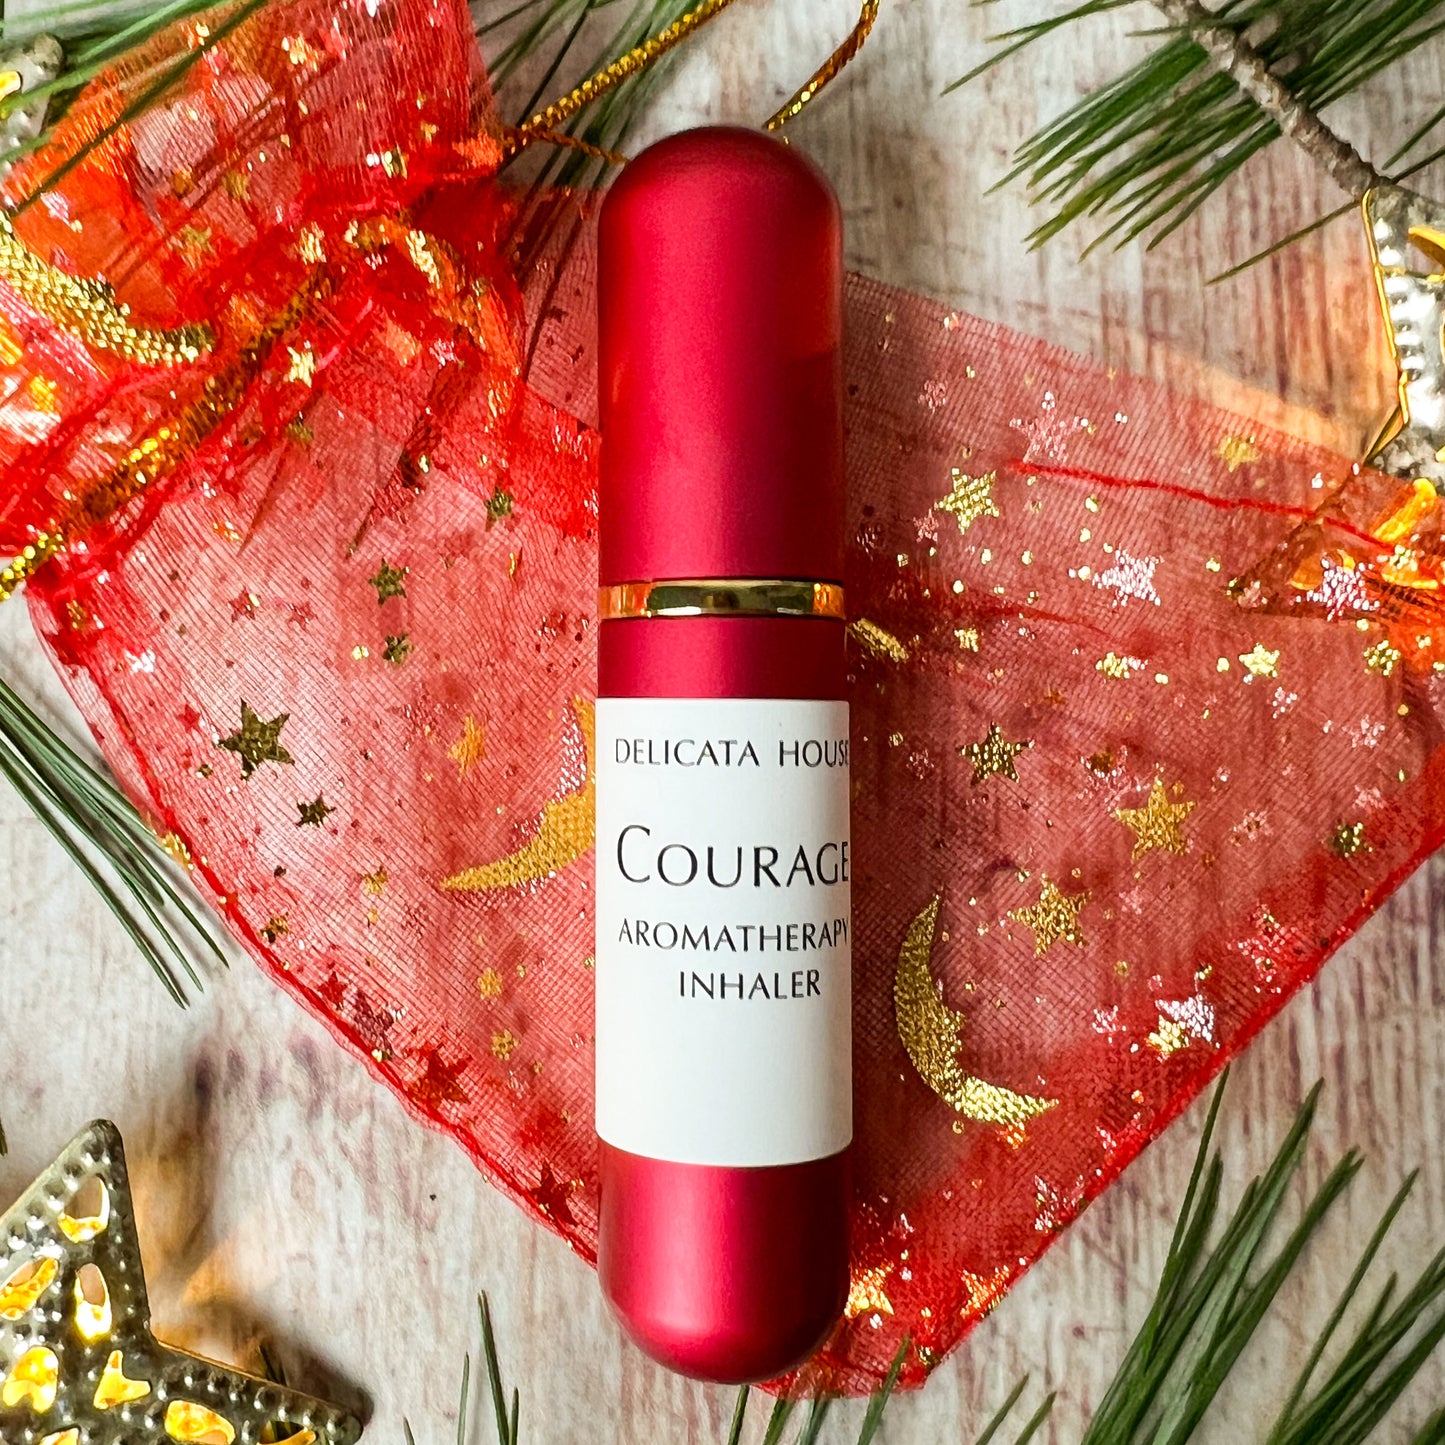 Courage Aromatherapy Nasal Inhaler - Aromatherapy for Overcoming Fear, for Confidence & Inner Strength